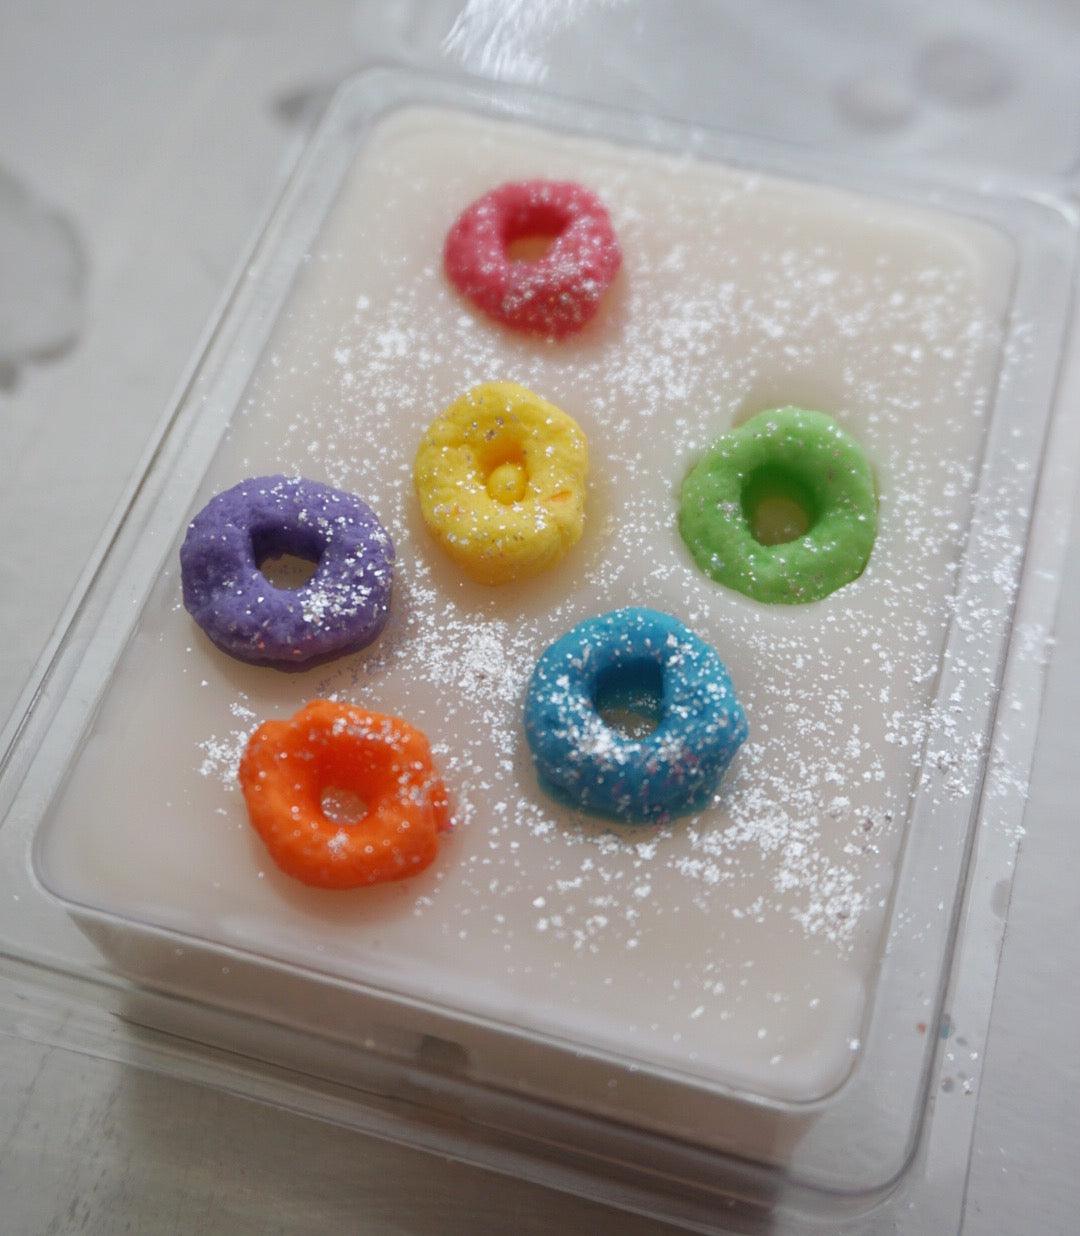 Fruity Loops Cereal Wax Melt Clamshell by Southern Skye Beauty